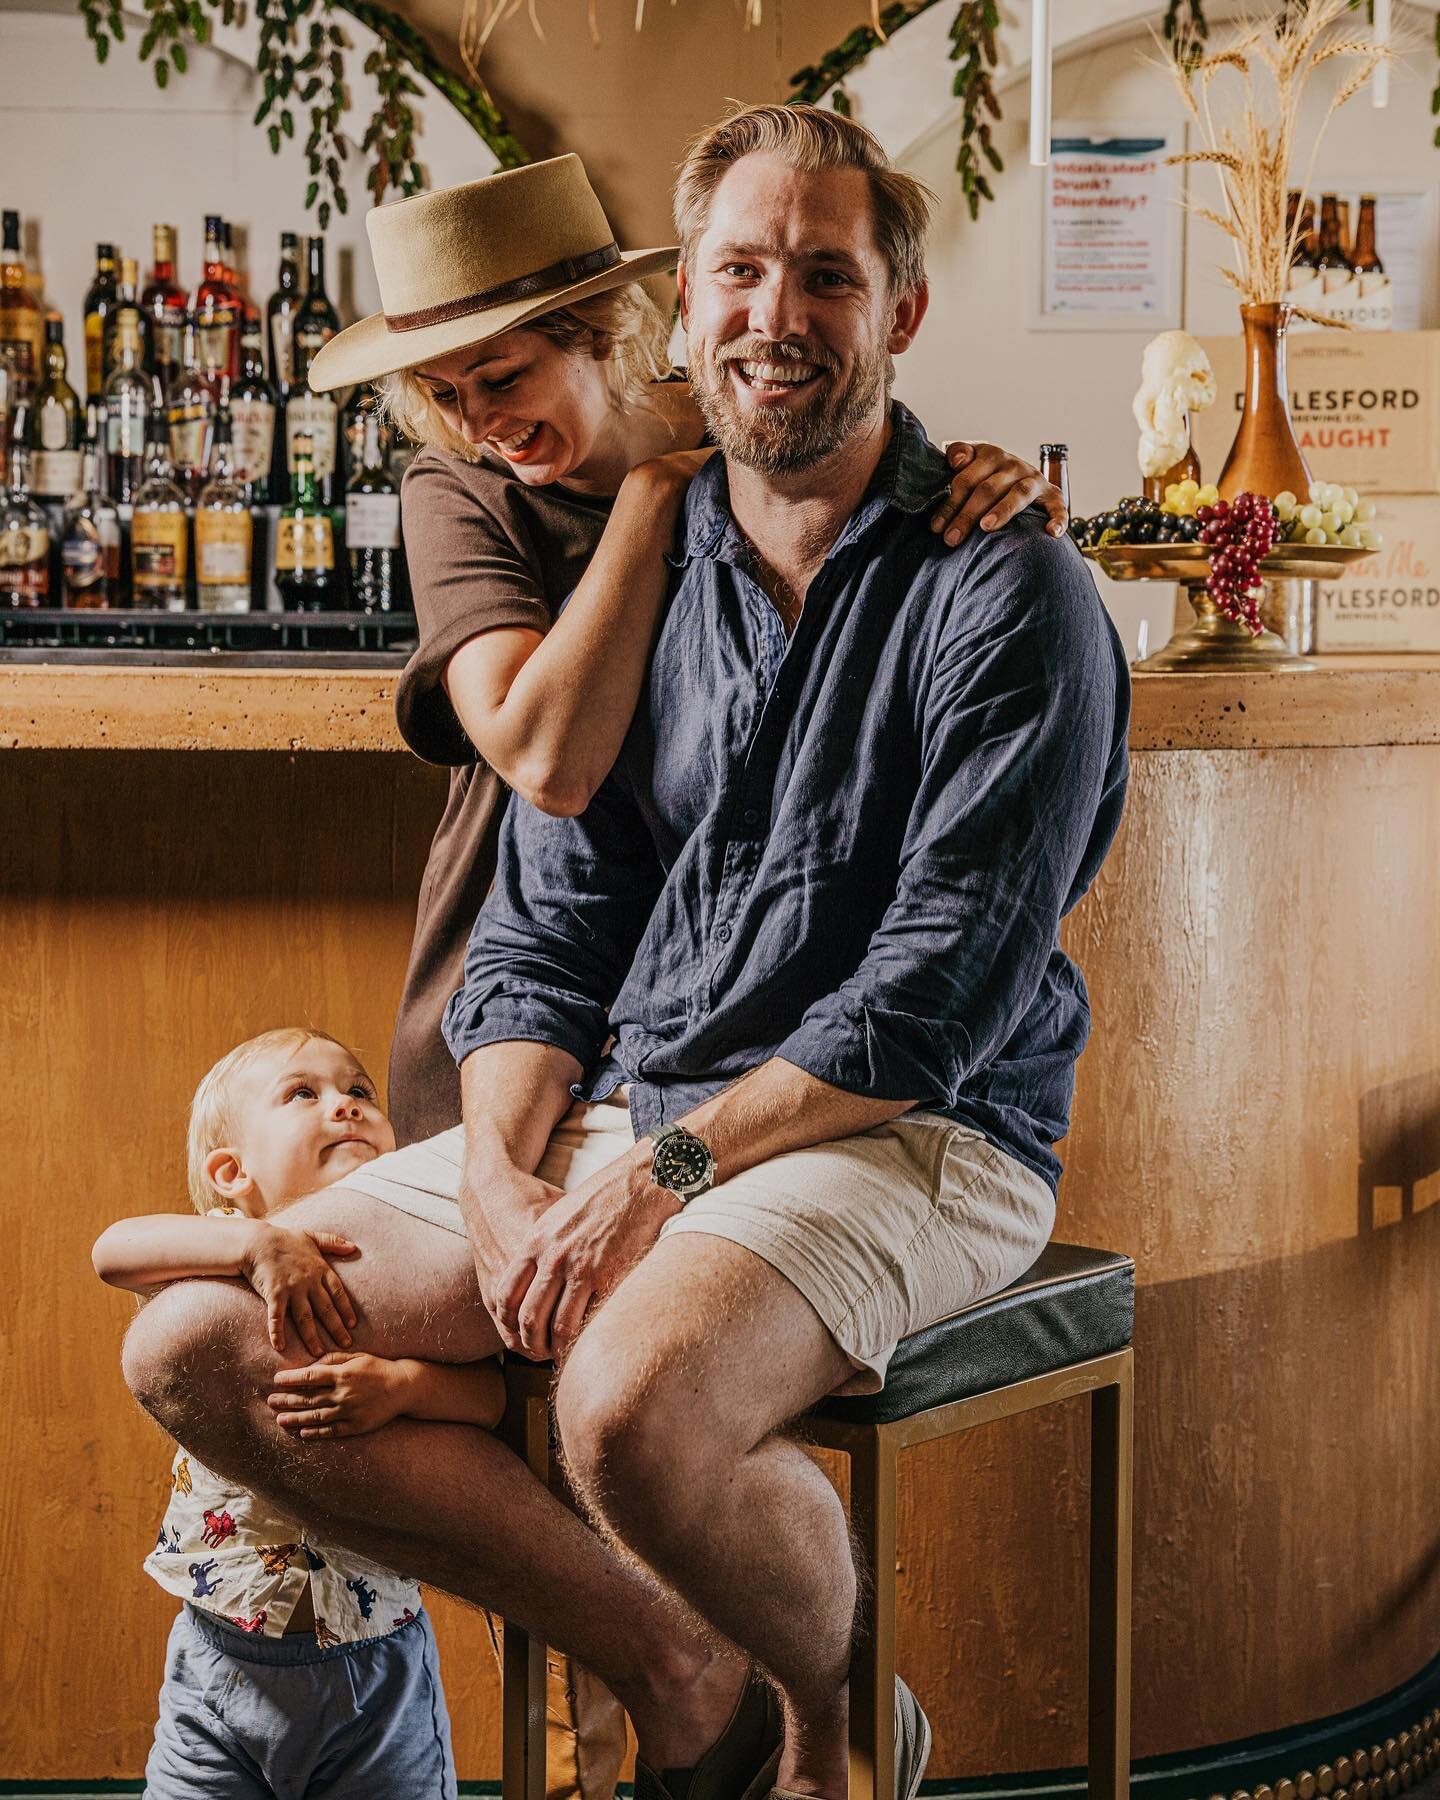 &bull; SPUR OF THE MOMENT PROPOSITION &bull;⁠
⁠
&ldquo;We&rsquo;re still tapping into Daylesford&rsquo;s goldrush history with the brewing but we also love the dining scene in town and want to be an integral part of that,&rdquo; says Dave. ⁠
⁠
But, a